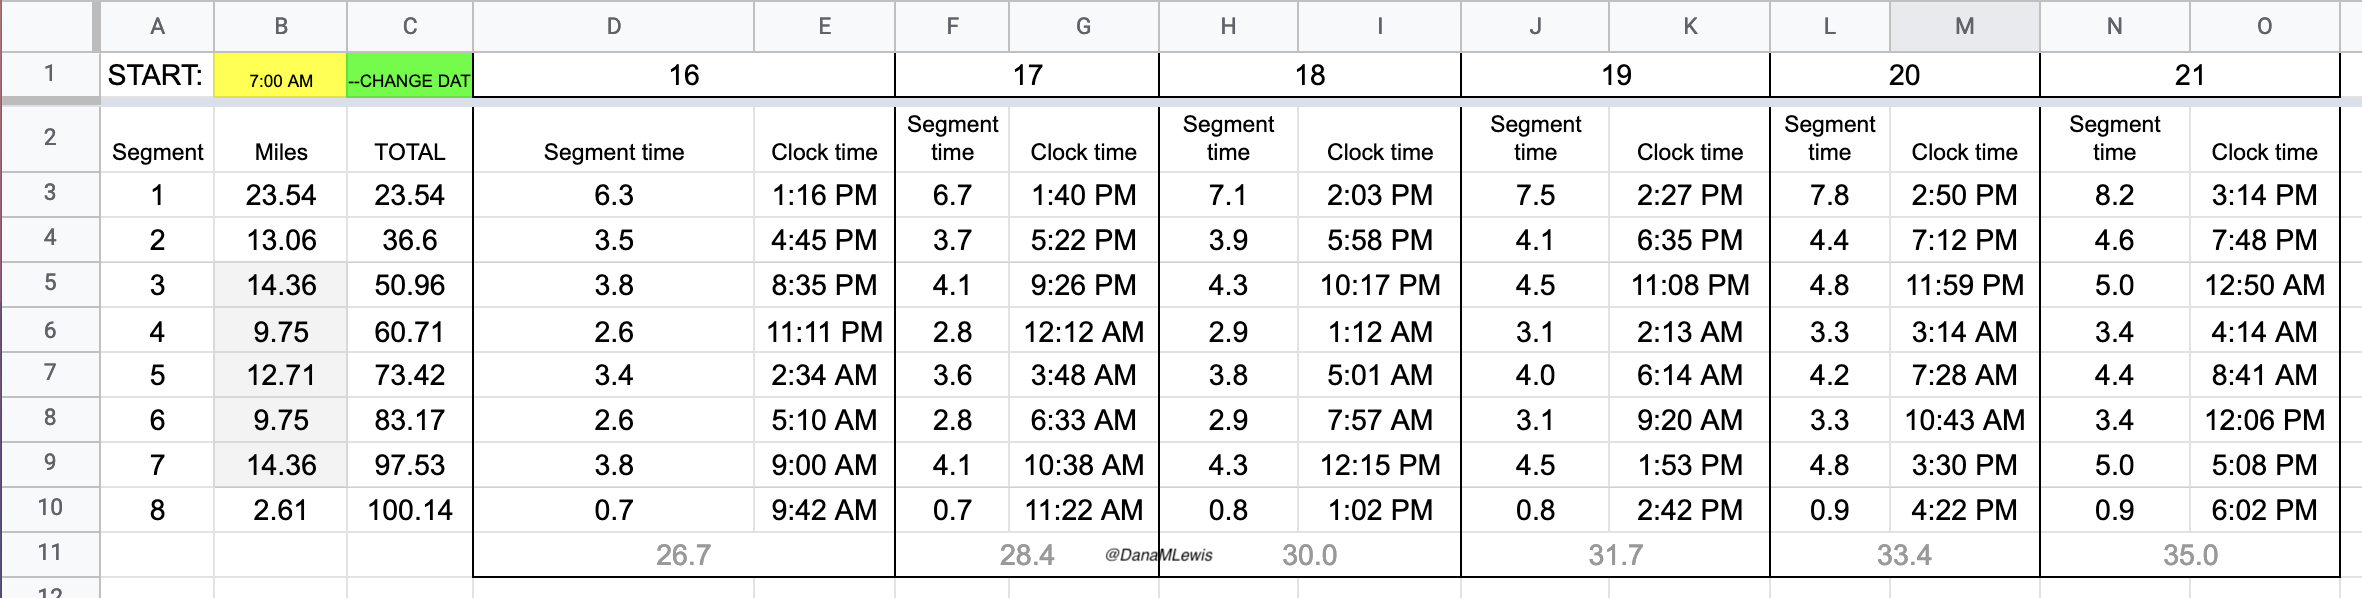 Example of a 100 mile pace chart, with rows for each segment/lap run and then columns estimating a different minute per mile pace and how that changed the total segment time and clock time for each lap. 